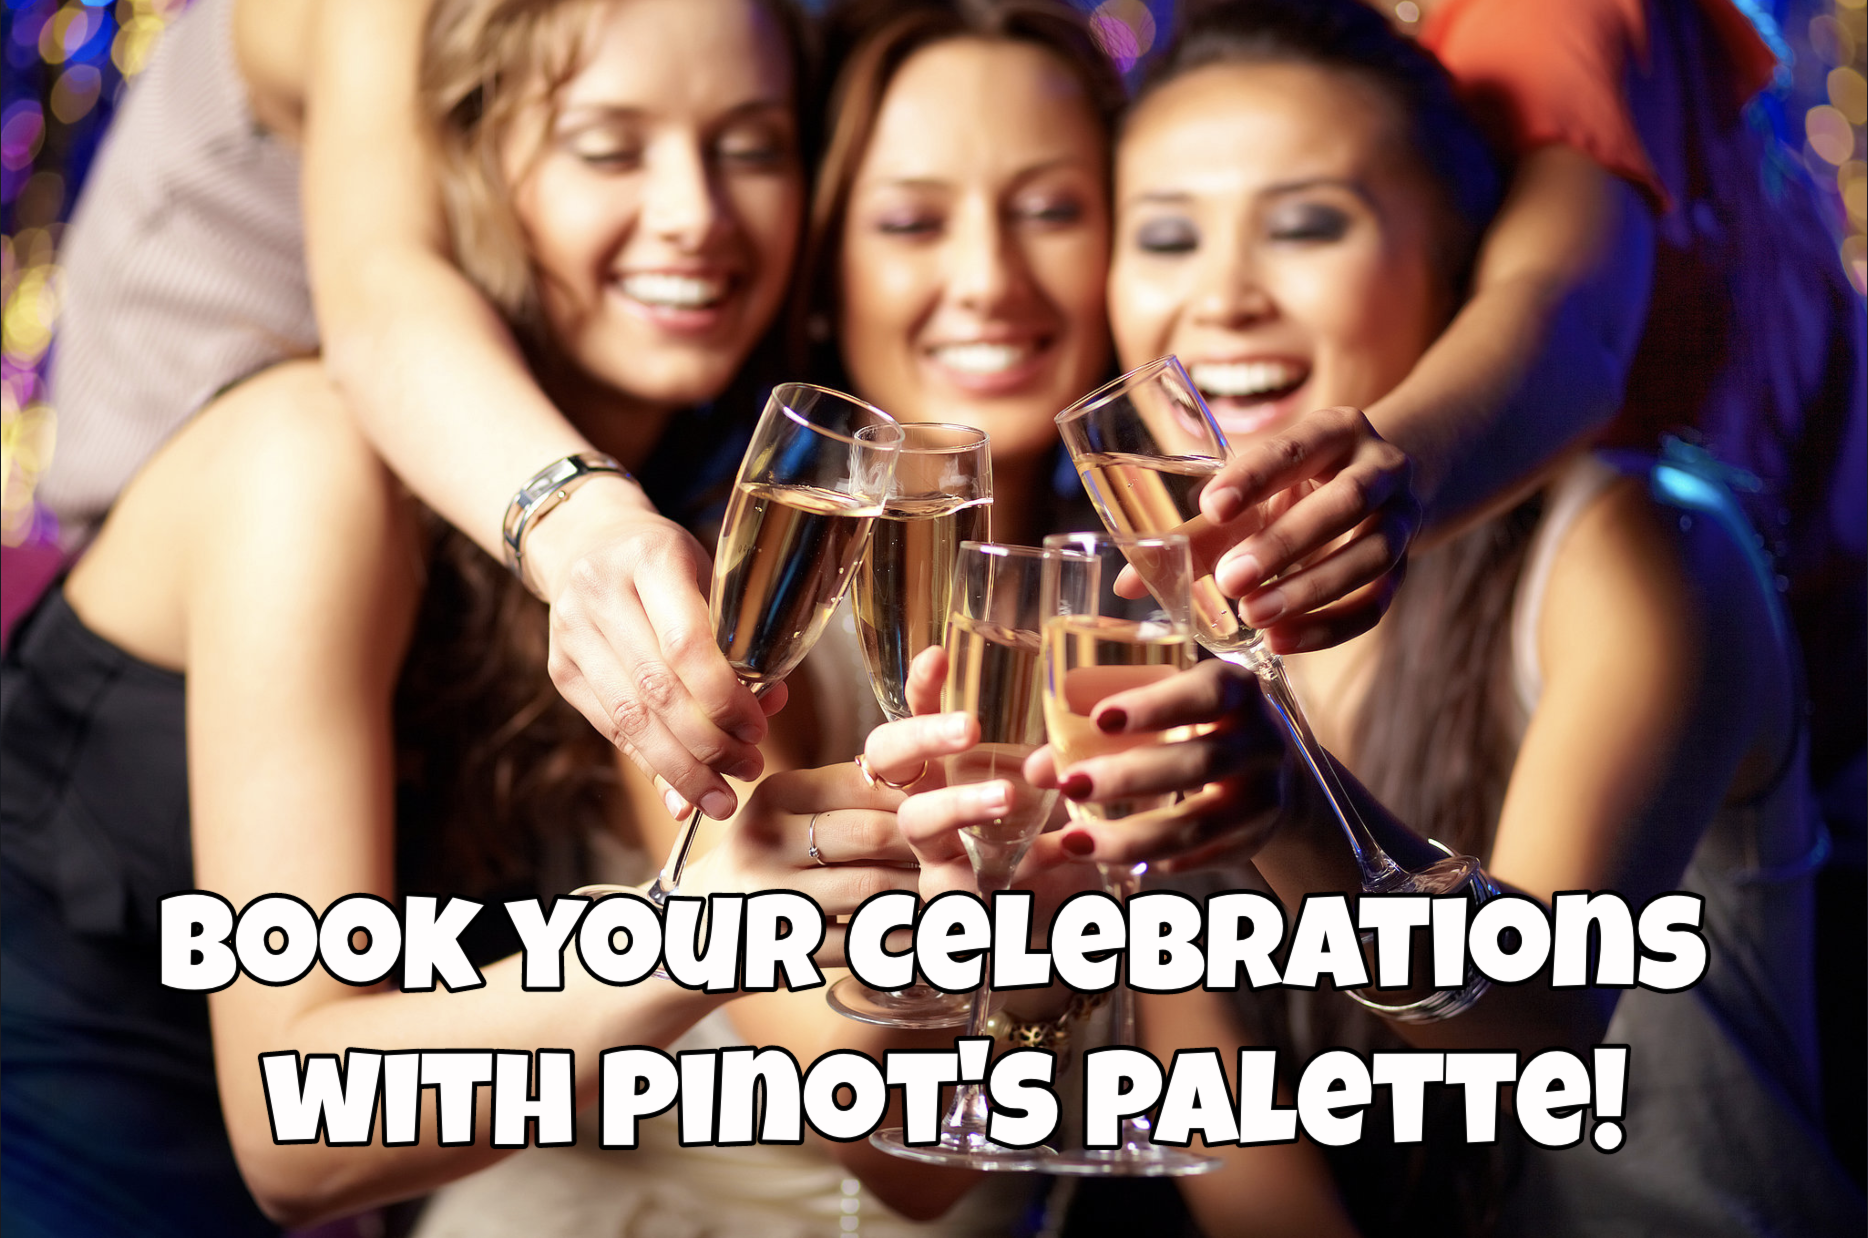 Celebrate this Holiday Season with Pinot's Palette